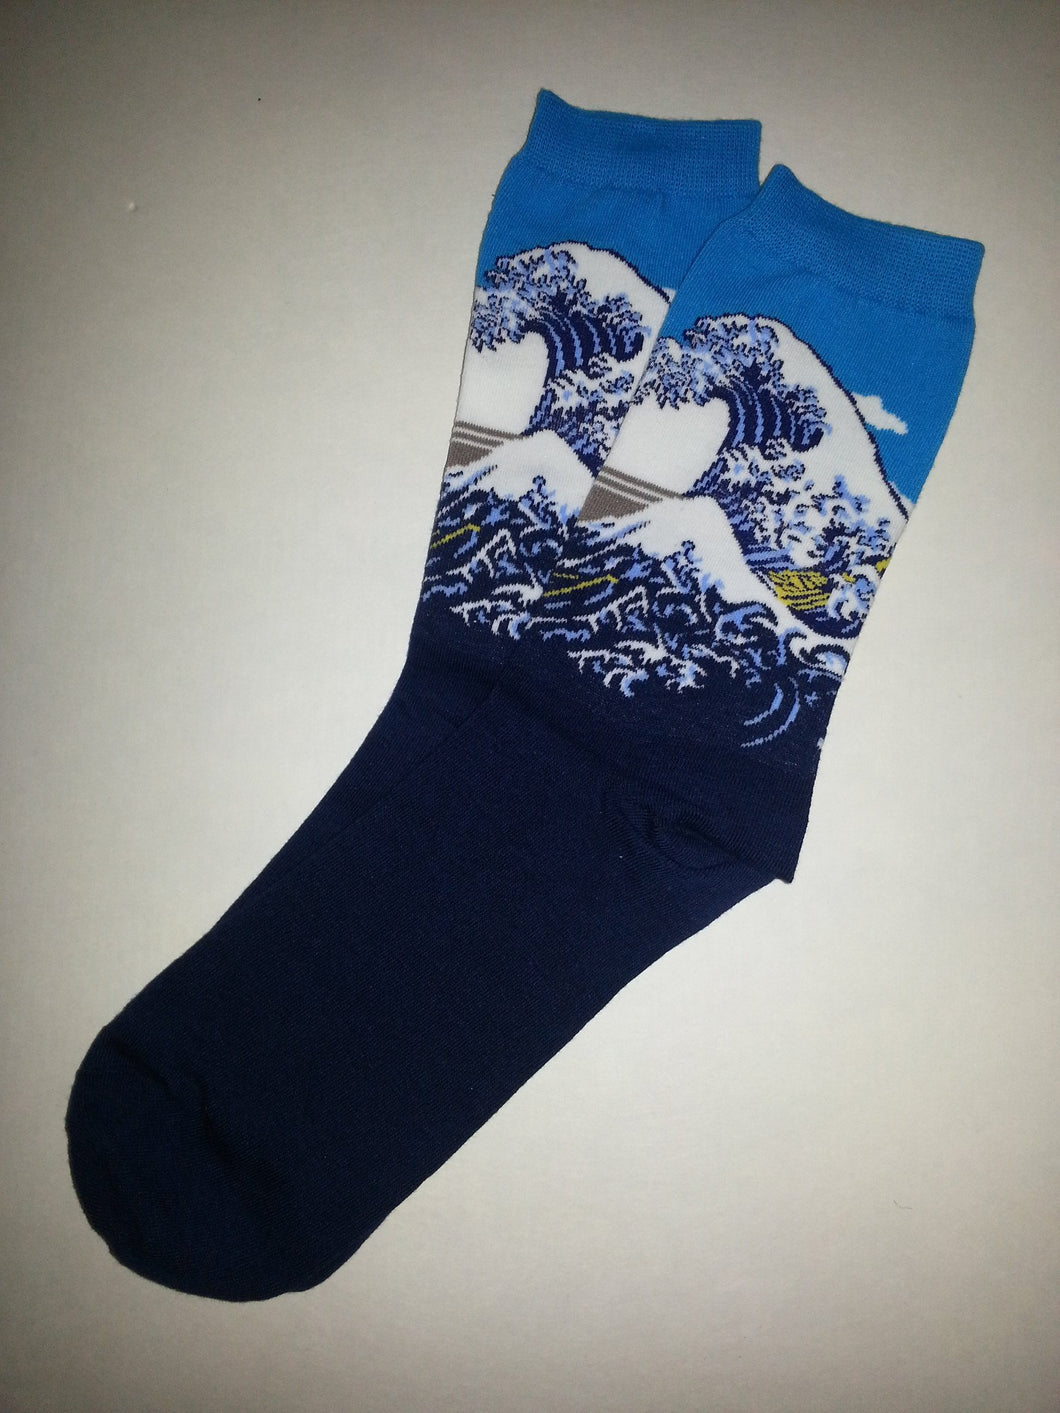 The Great Wave by Hokusai Crew Socks